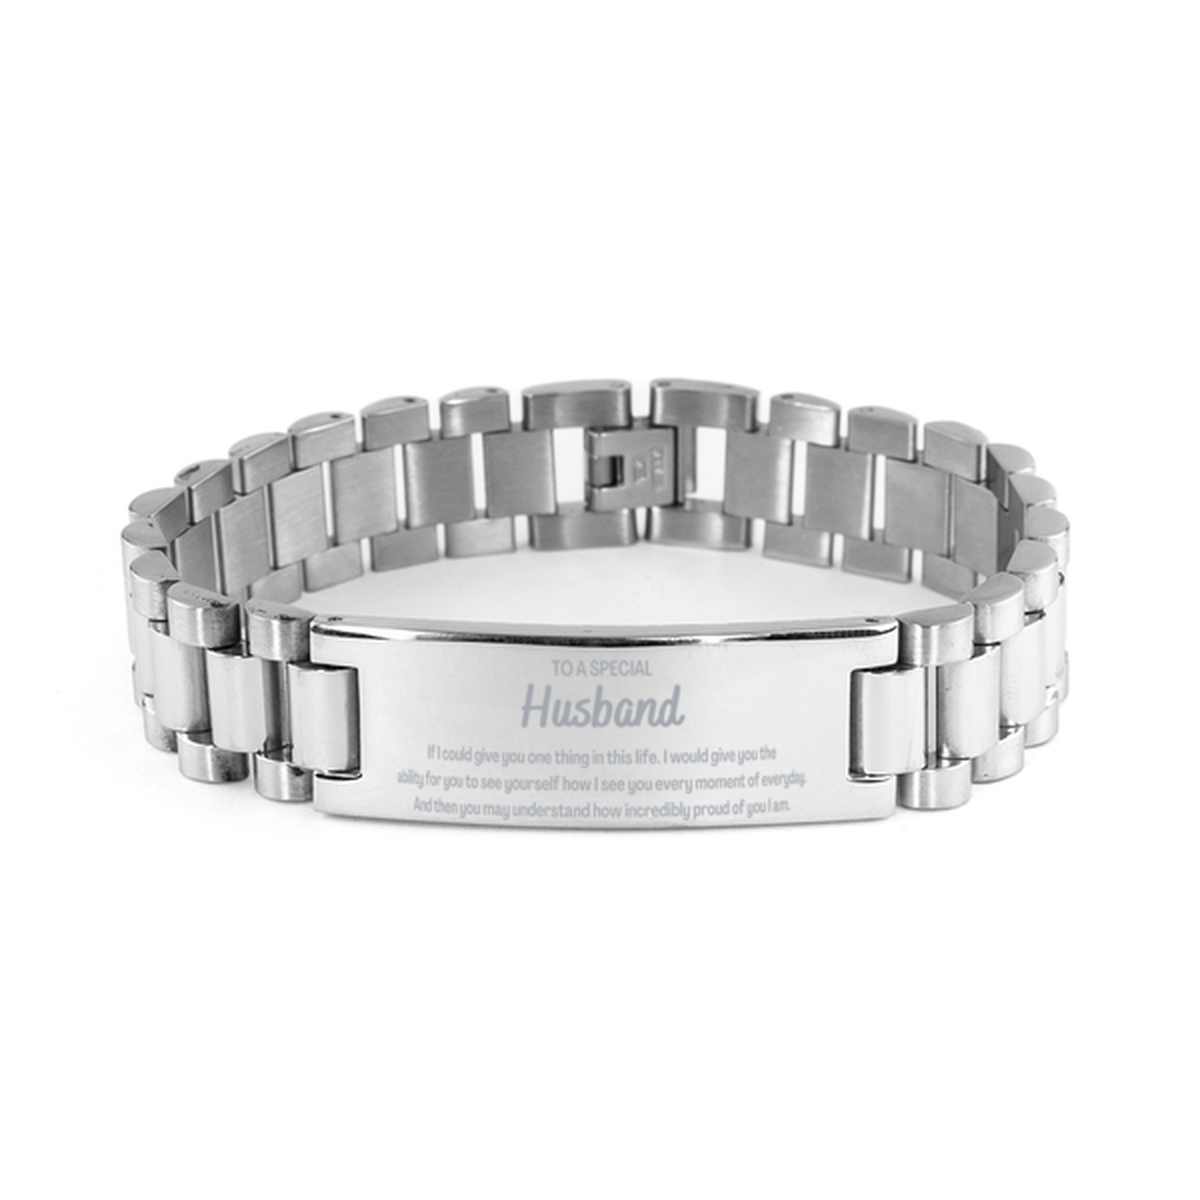 To My Husband Ladder Stainless Steel Bracelet, Gifts For Husband Engraved, Inspirational Gifts for Christmas Birthday, Epic Gifts for Husband To A Special Husband how incredibly proud of you I am